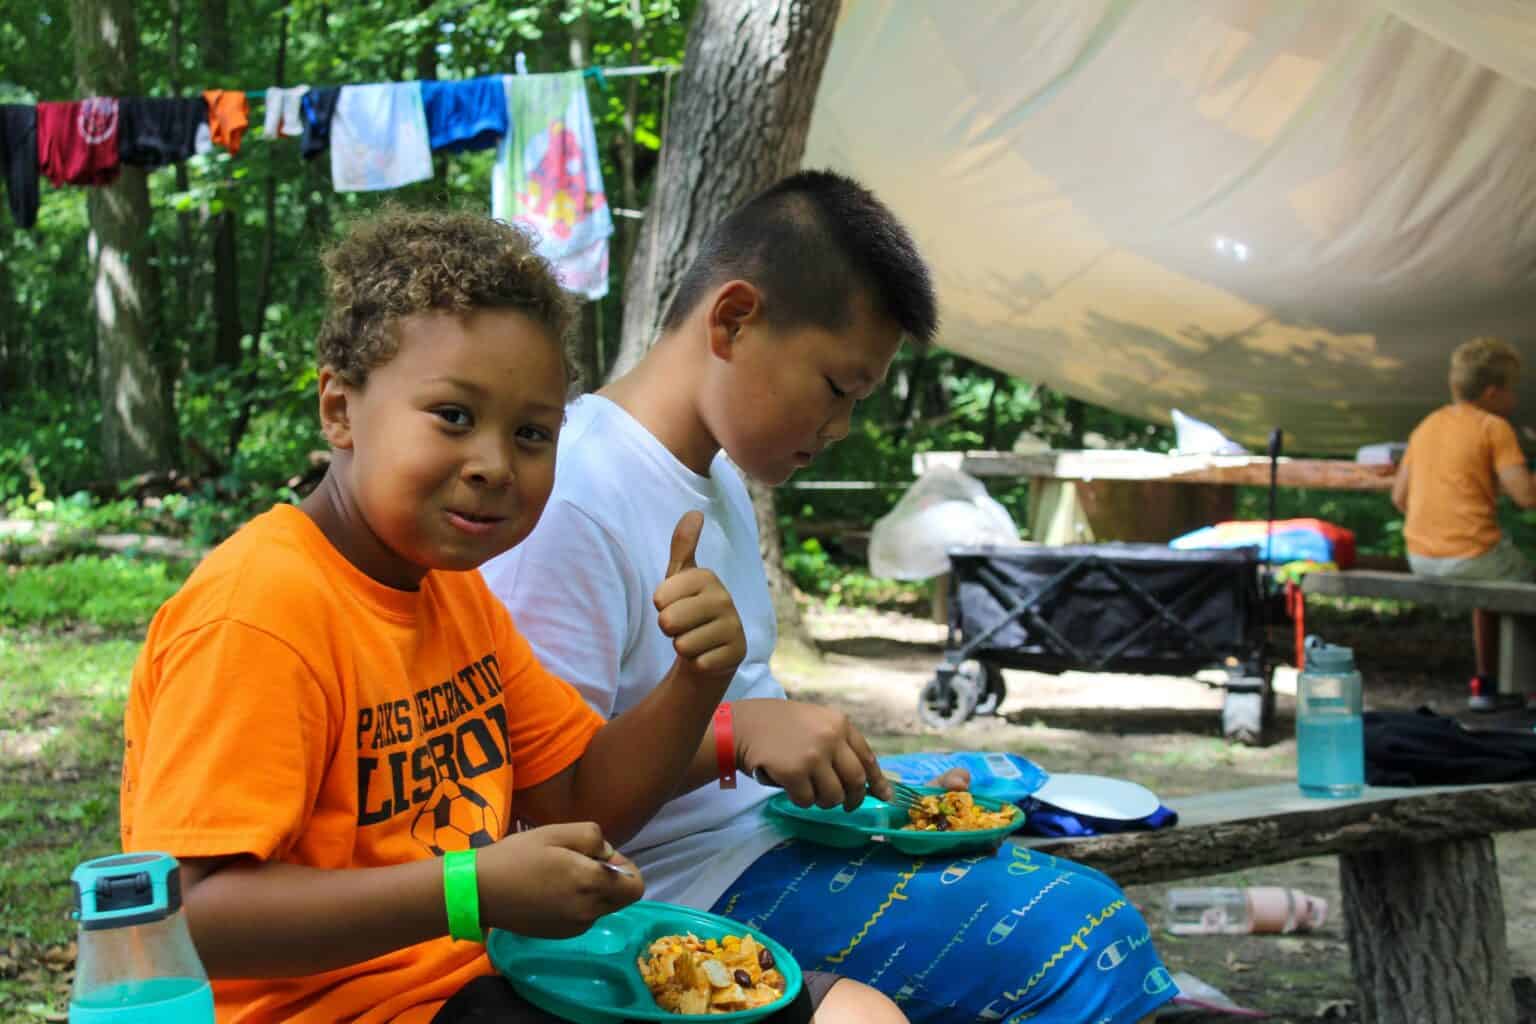 Two young boys at an Iowa summer camp eating plates of food.